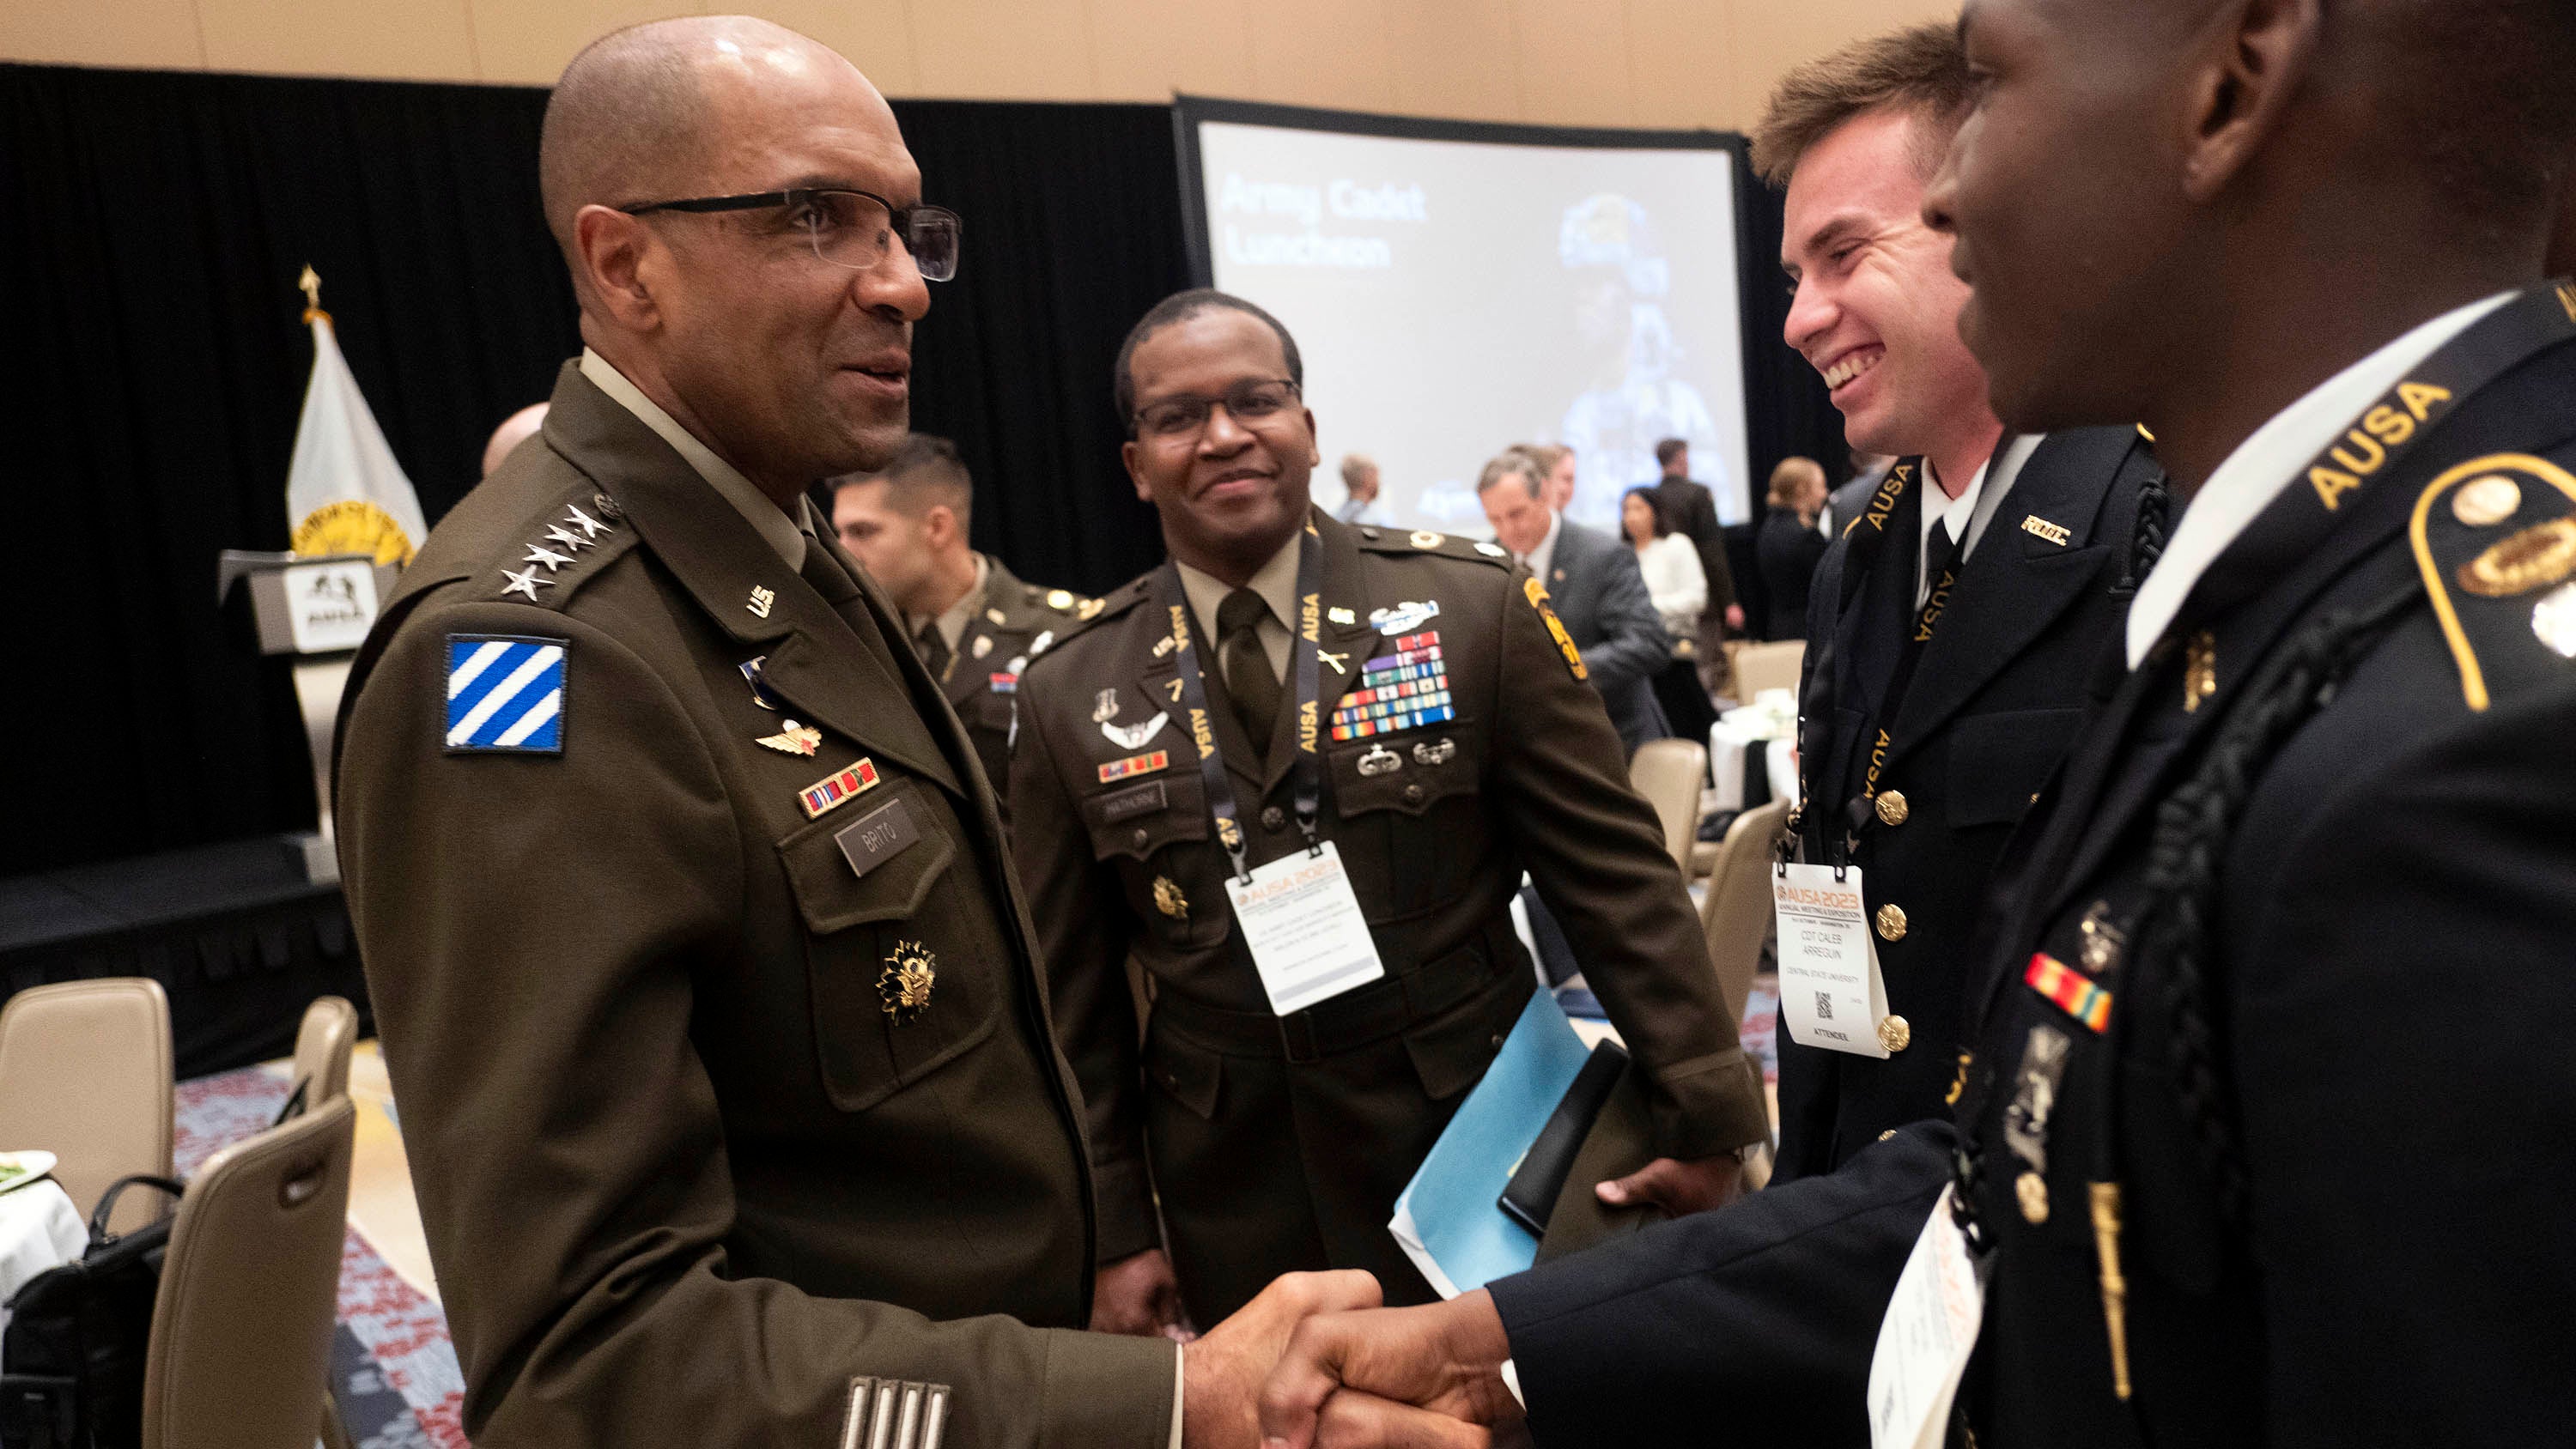 Gen. Gary Brito greets cadets at the Army Cadet Luncheon during the AUSA 2023 Annual Meeting in Washington, D.C., Monday, Oct. 9, 2023. (Pete Marovich for AUSA)